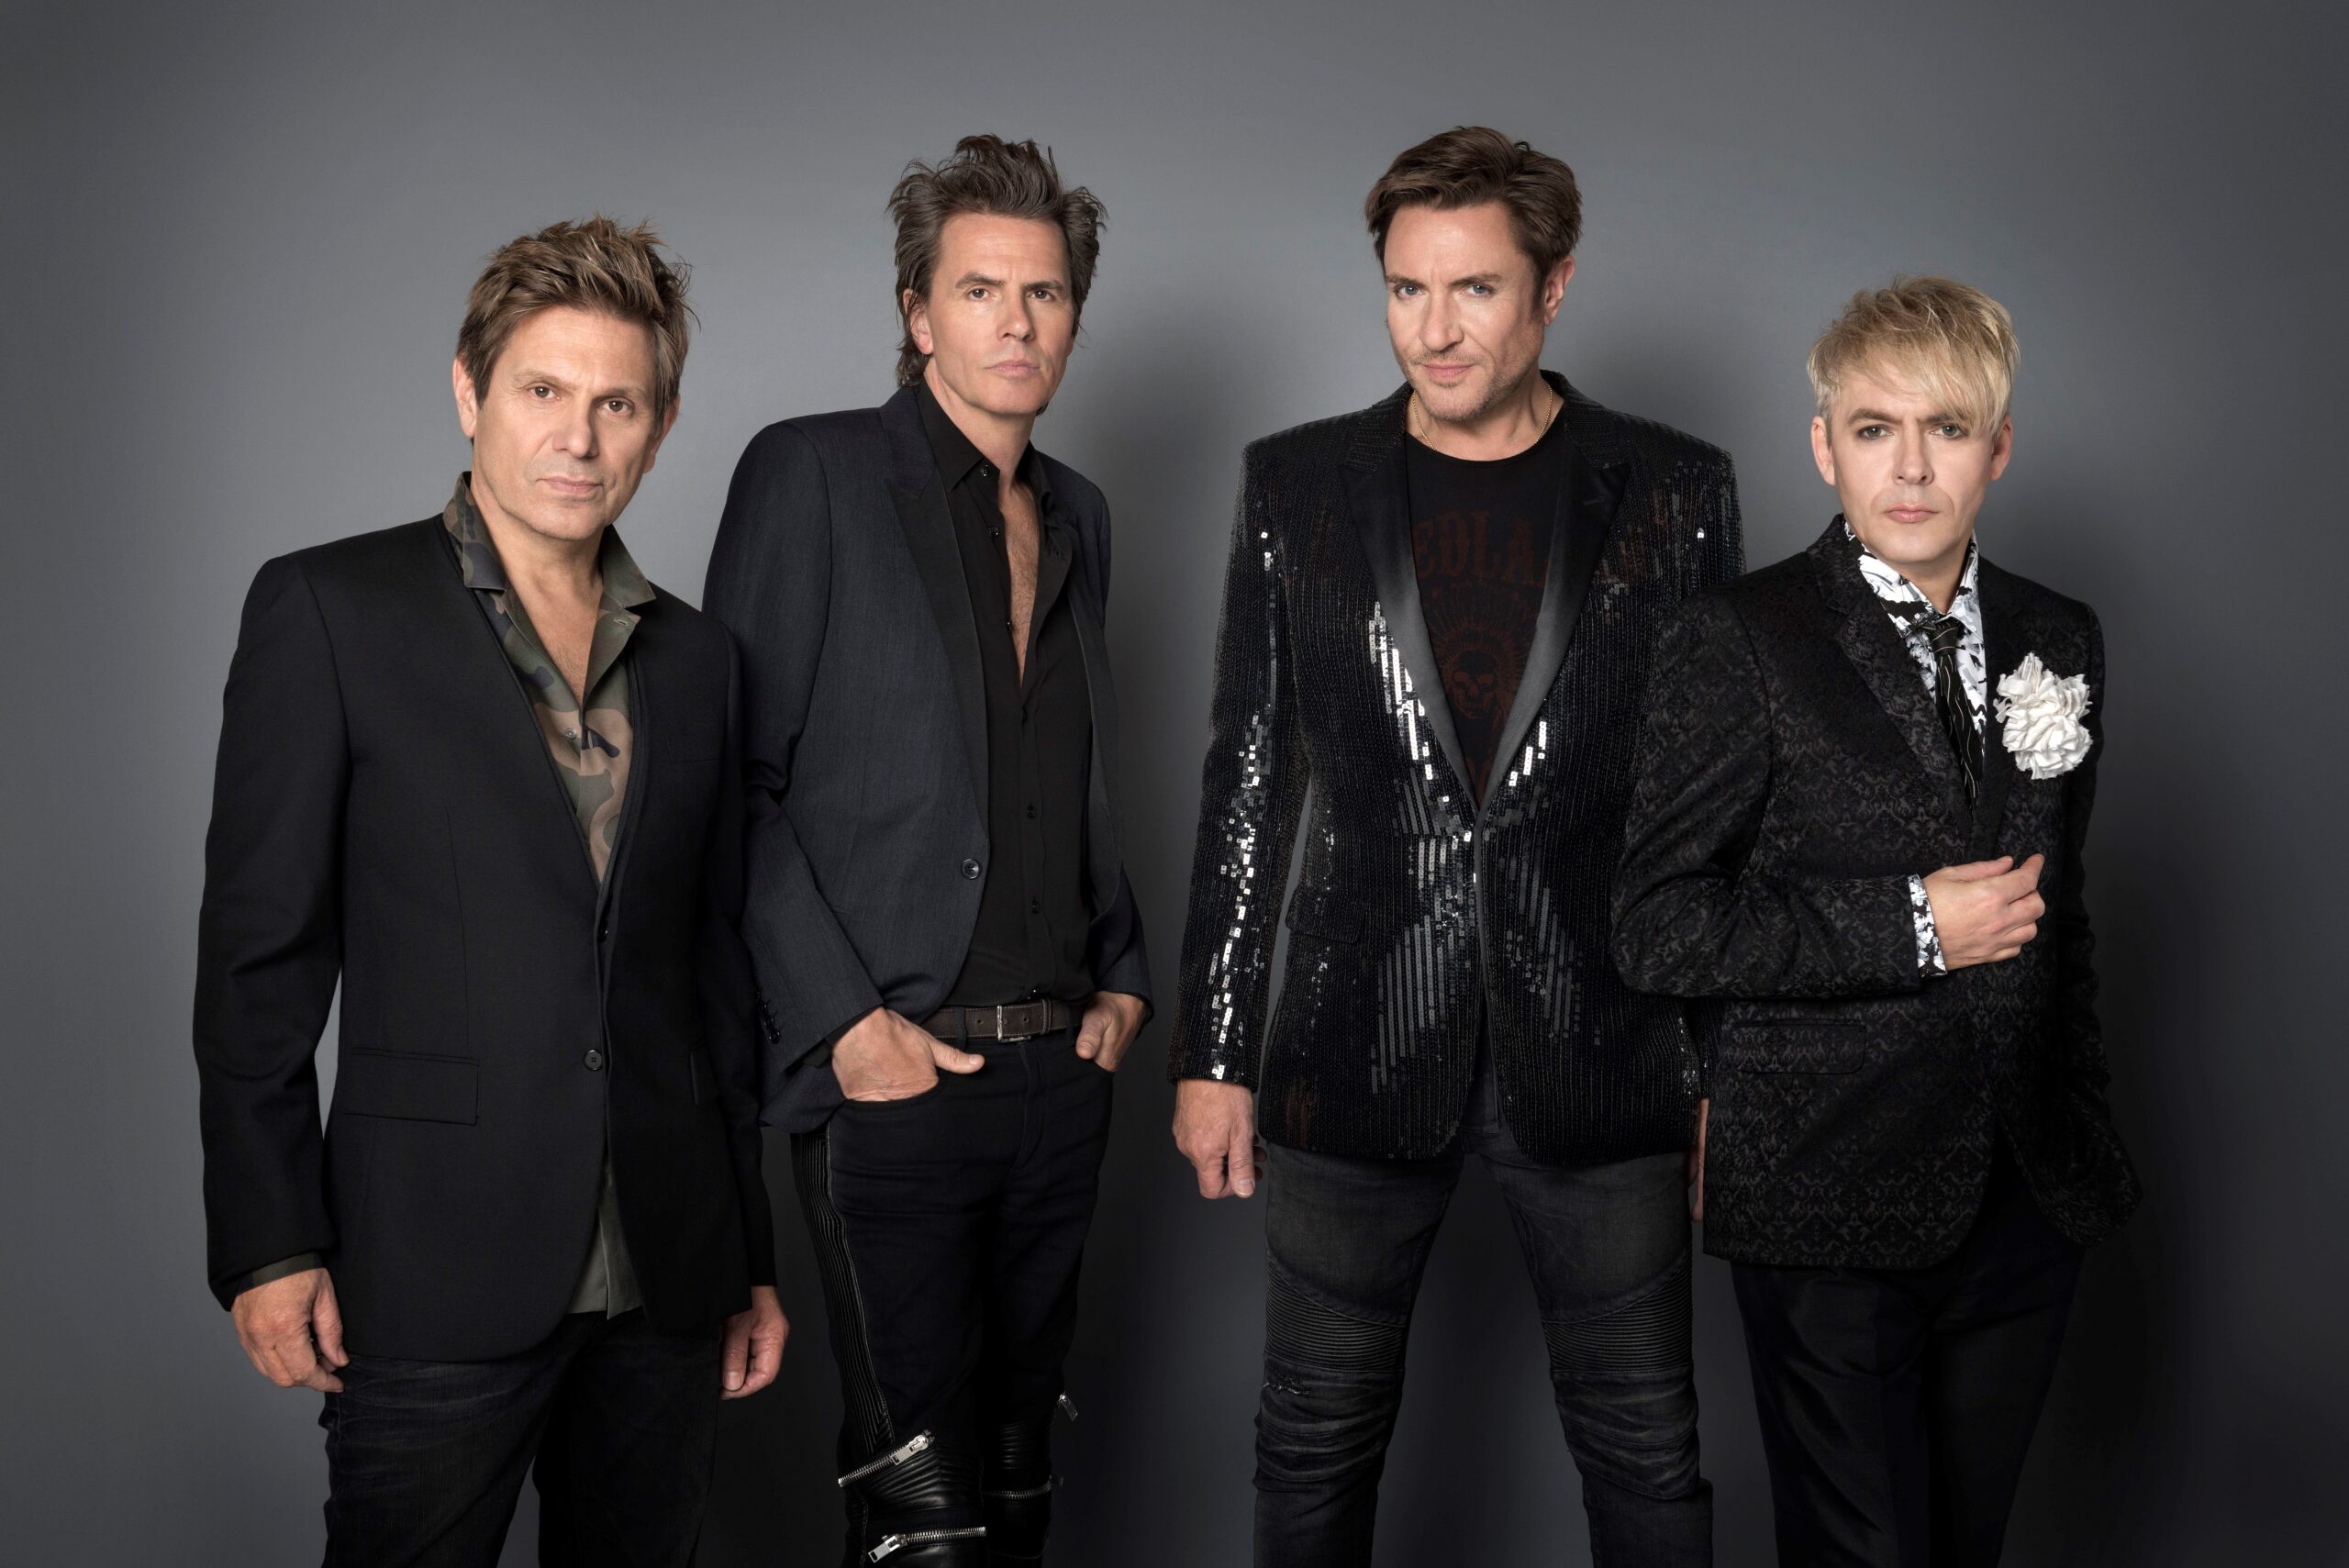 Duran Duran’s releases new album ‘Future Past’ out today